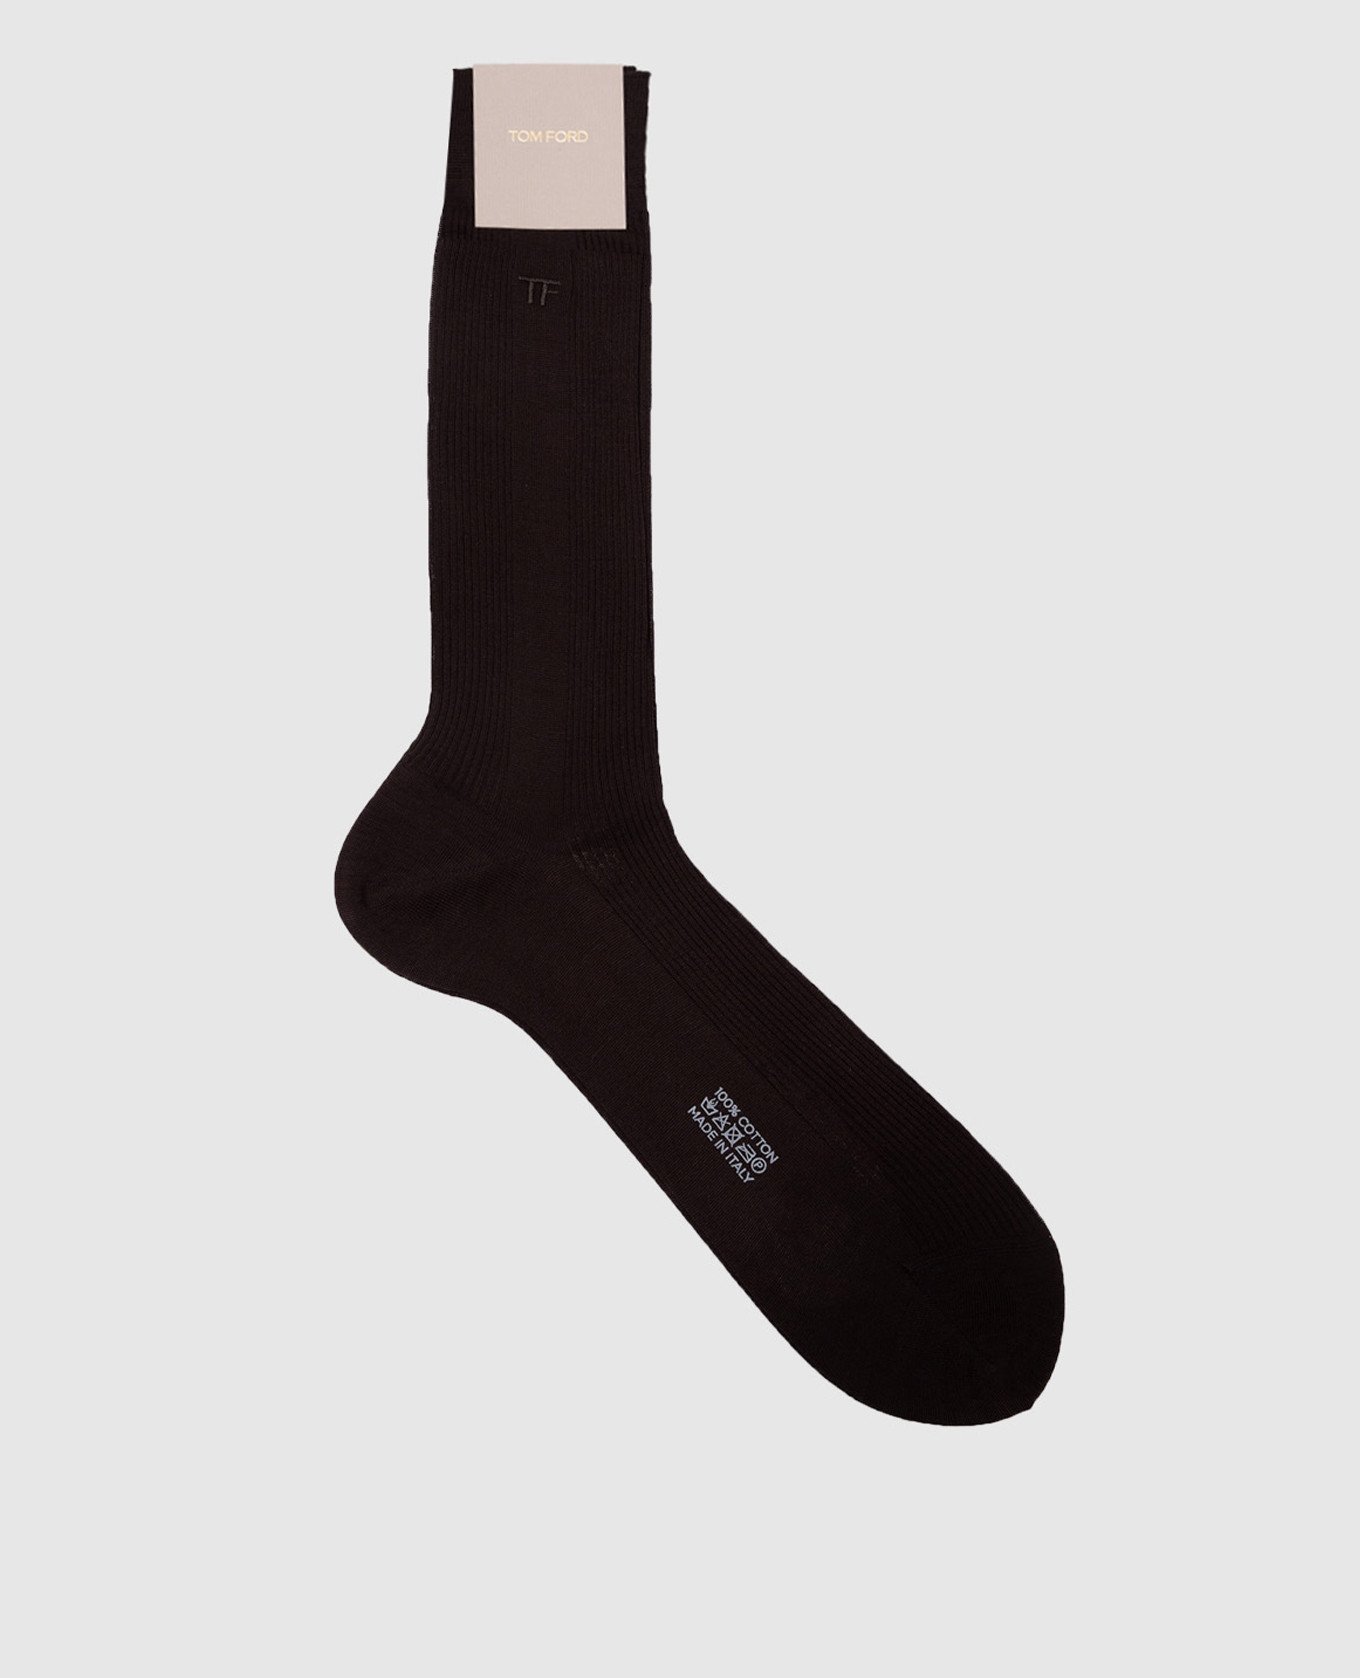 Brown socks with logo embroidery